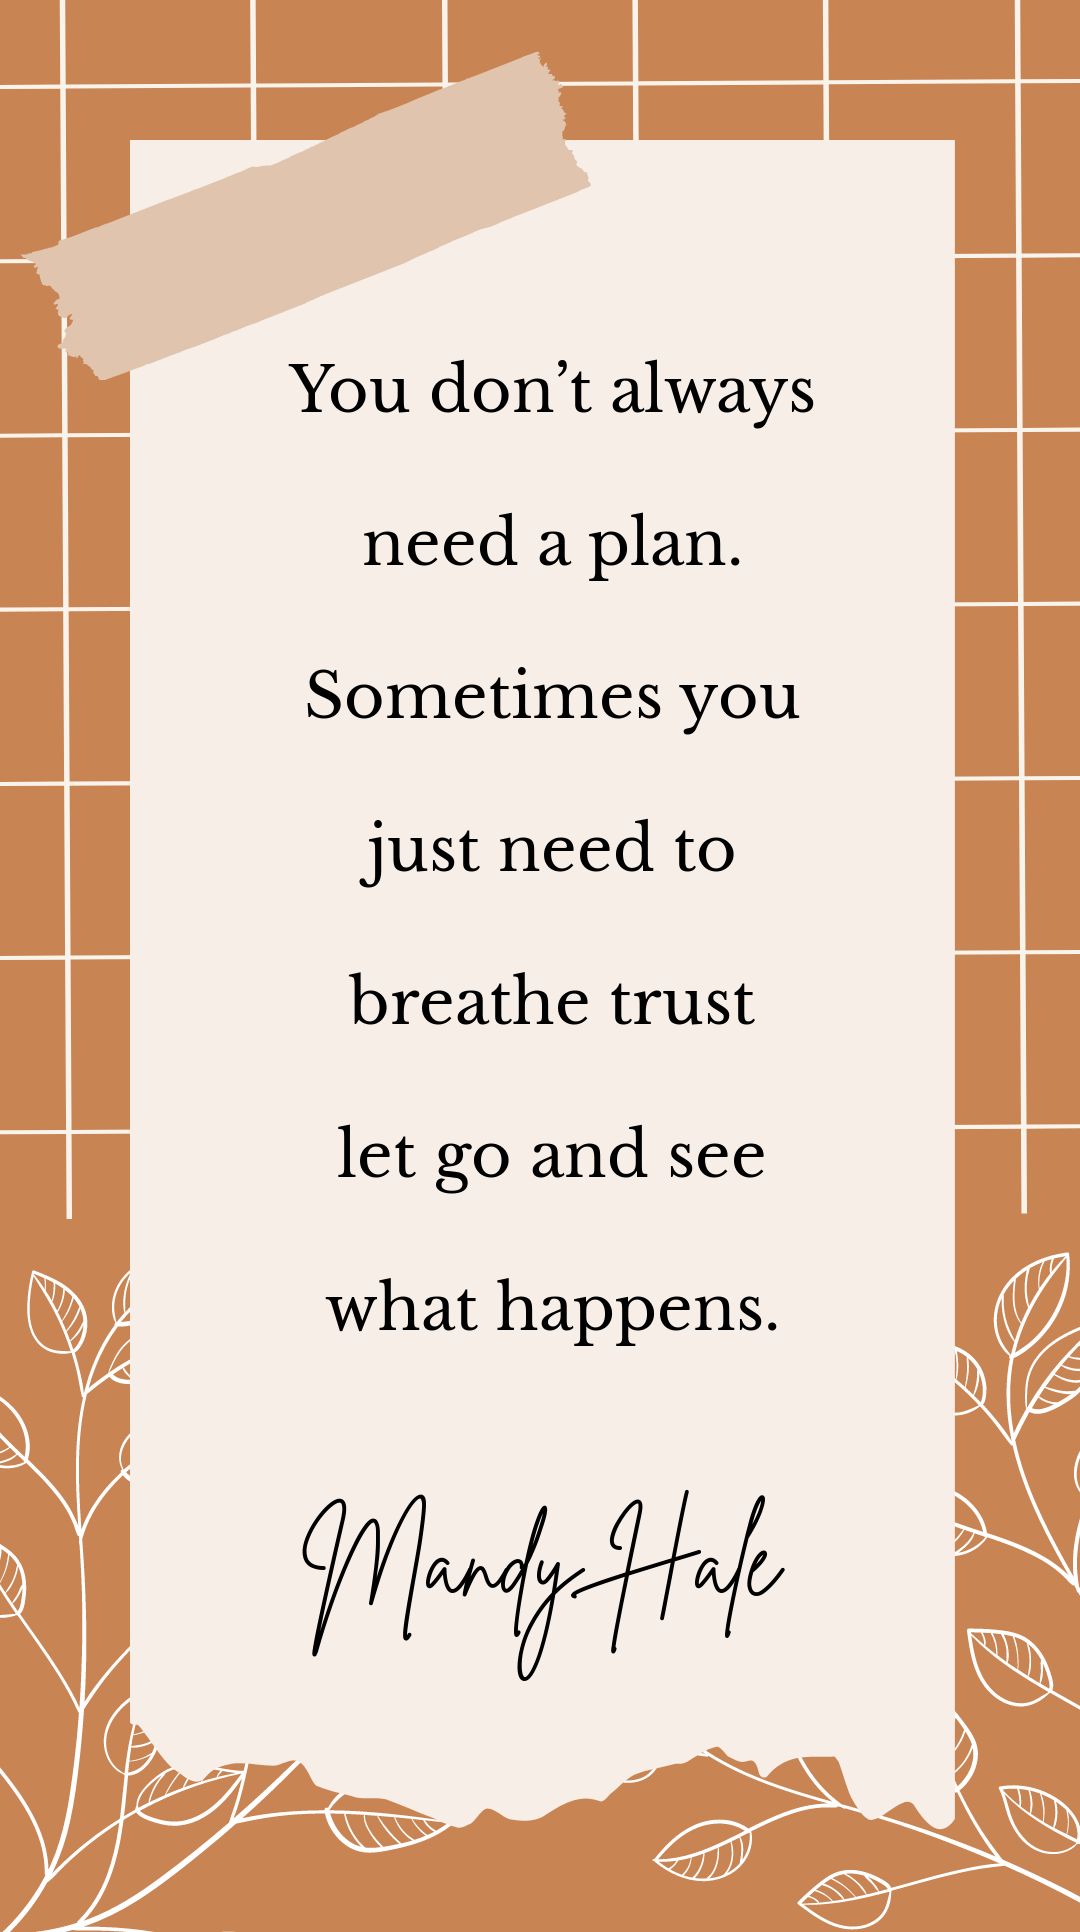 Mandy Hale - You don’t always need a plan. Sometimes you just need to breathe trust let go and see what happens.